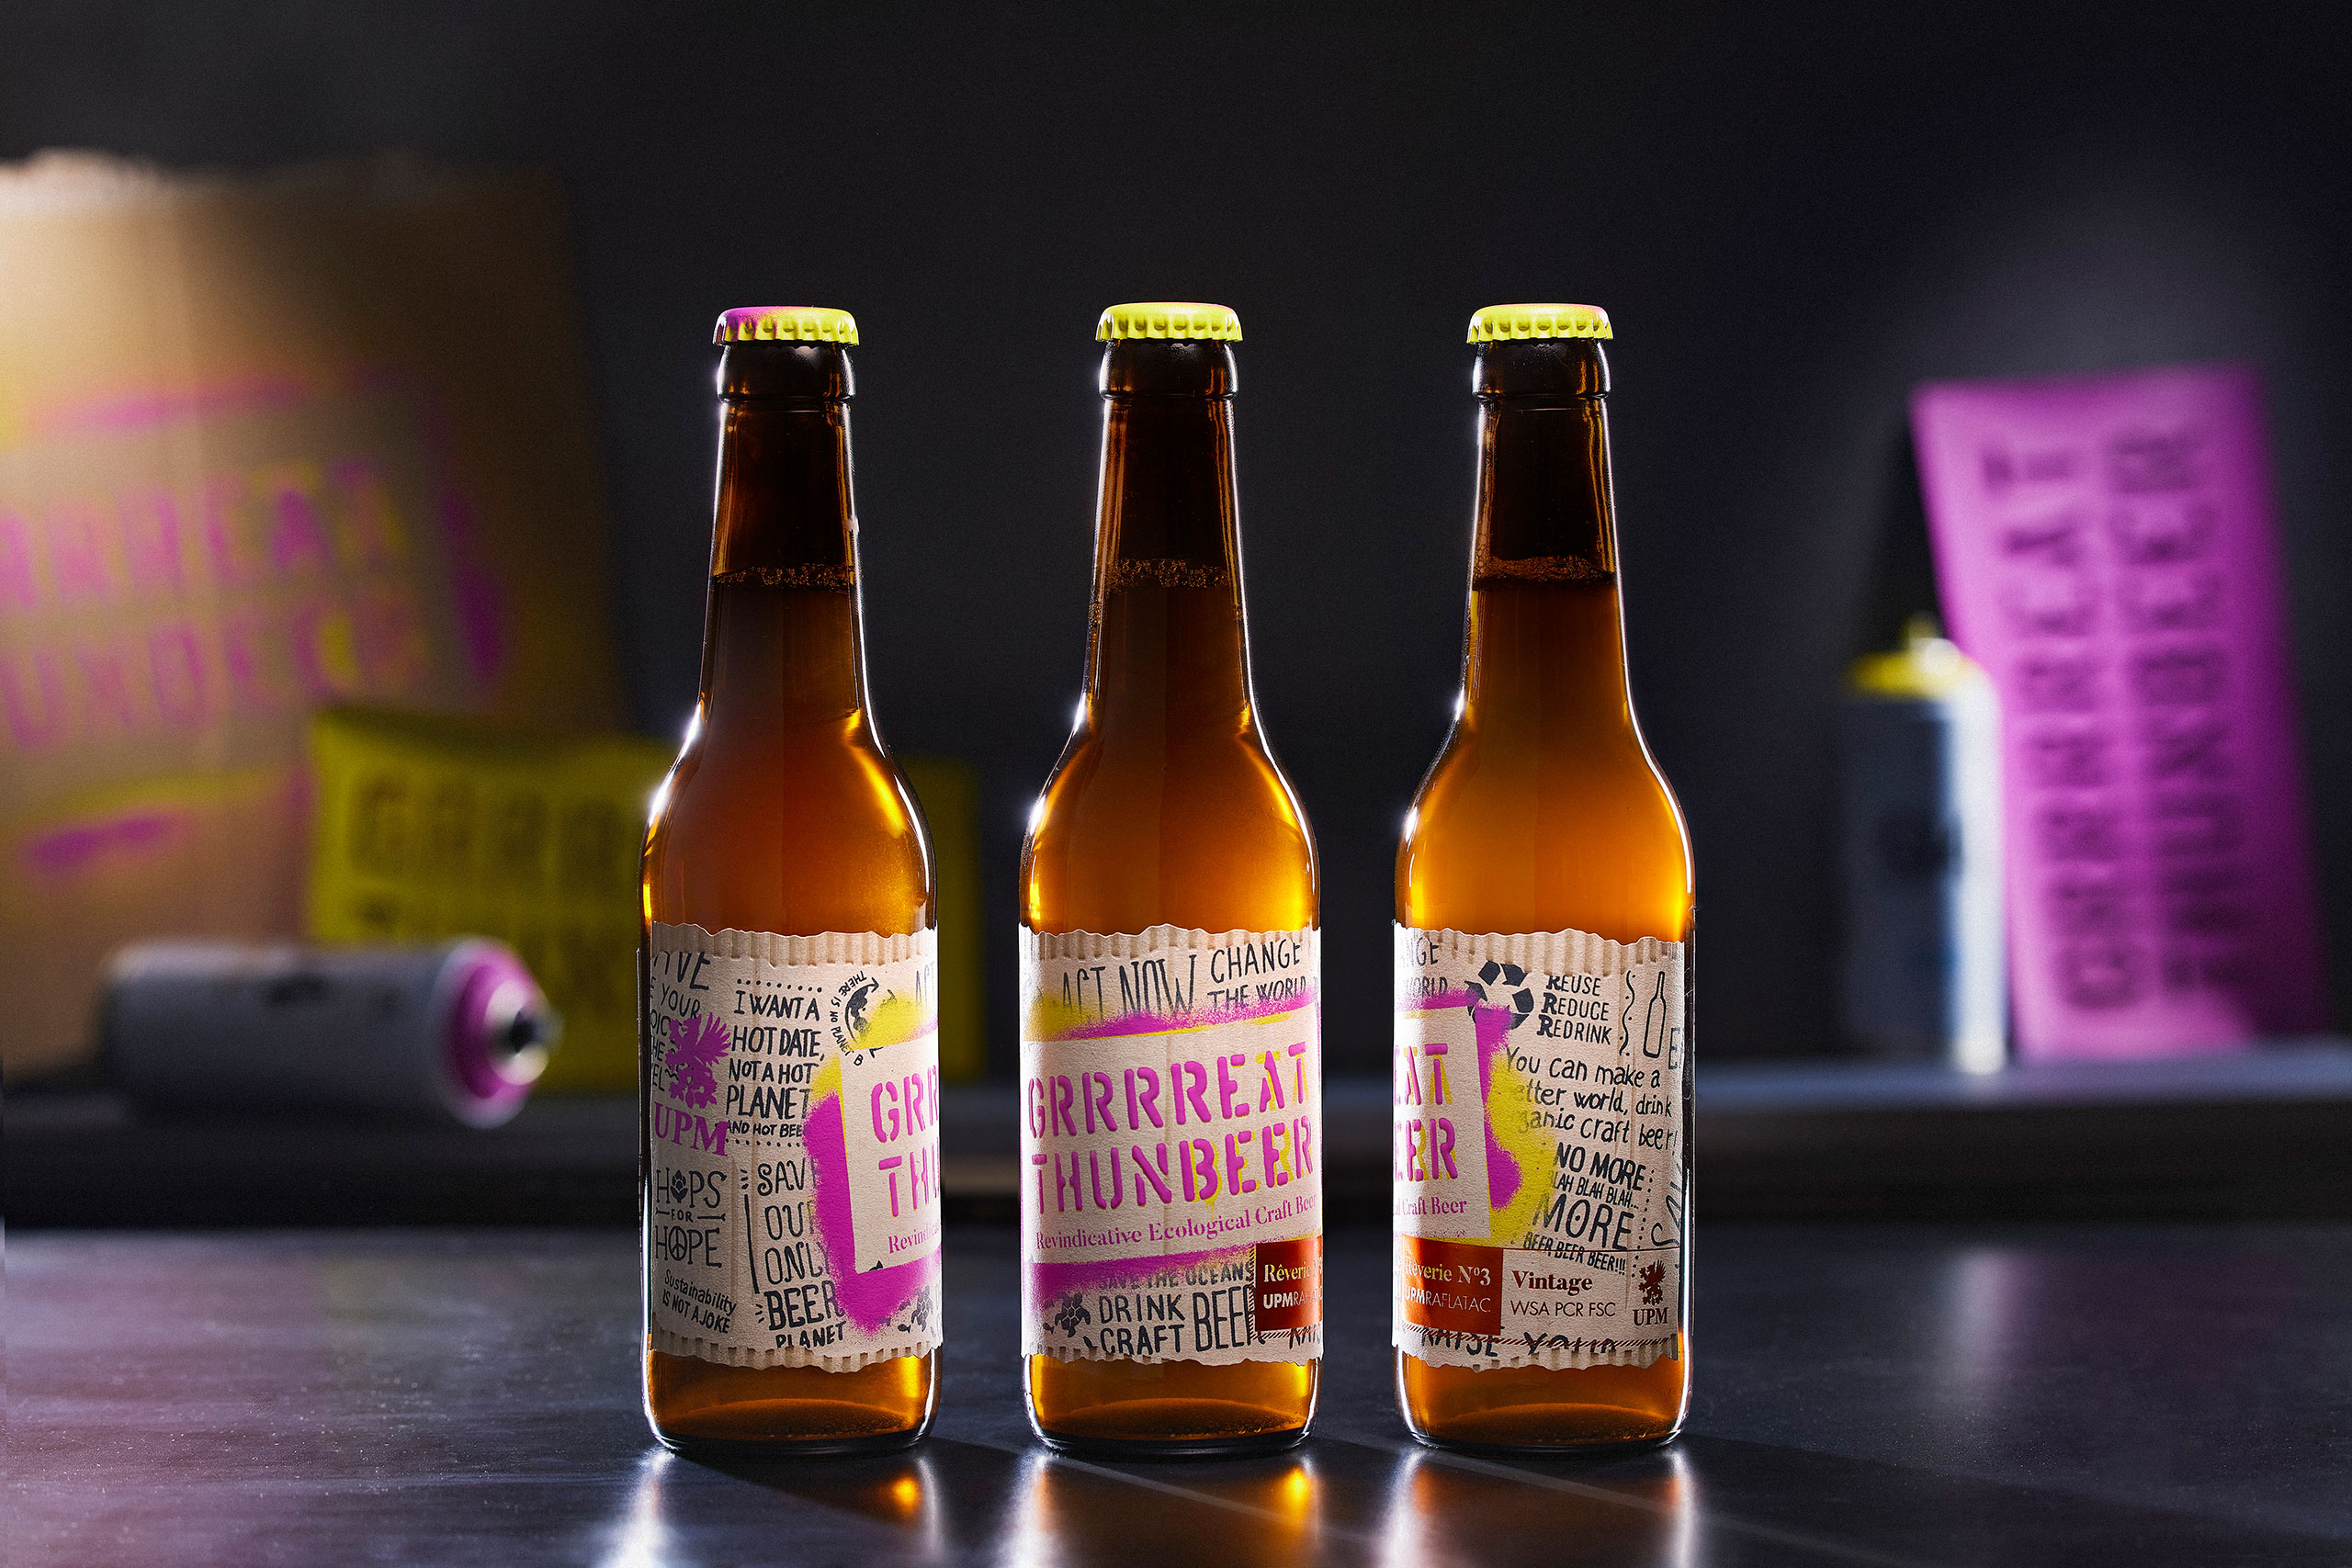 Bulldog Studio Create Grrrreat Thunbeer and the Social Revolution in Design Sustainability for Beer Packaging